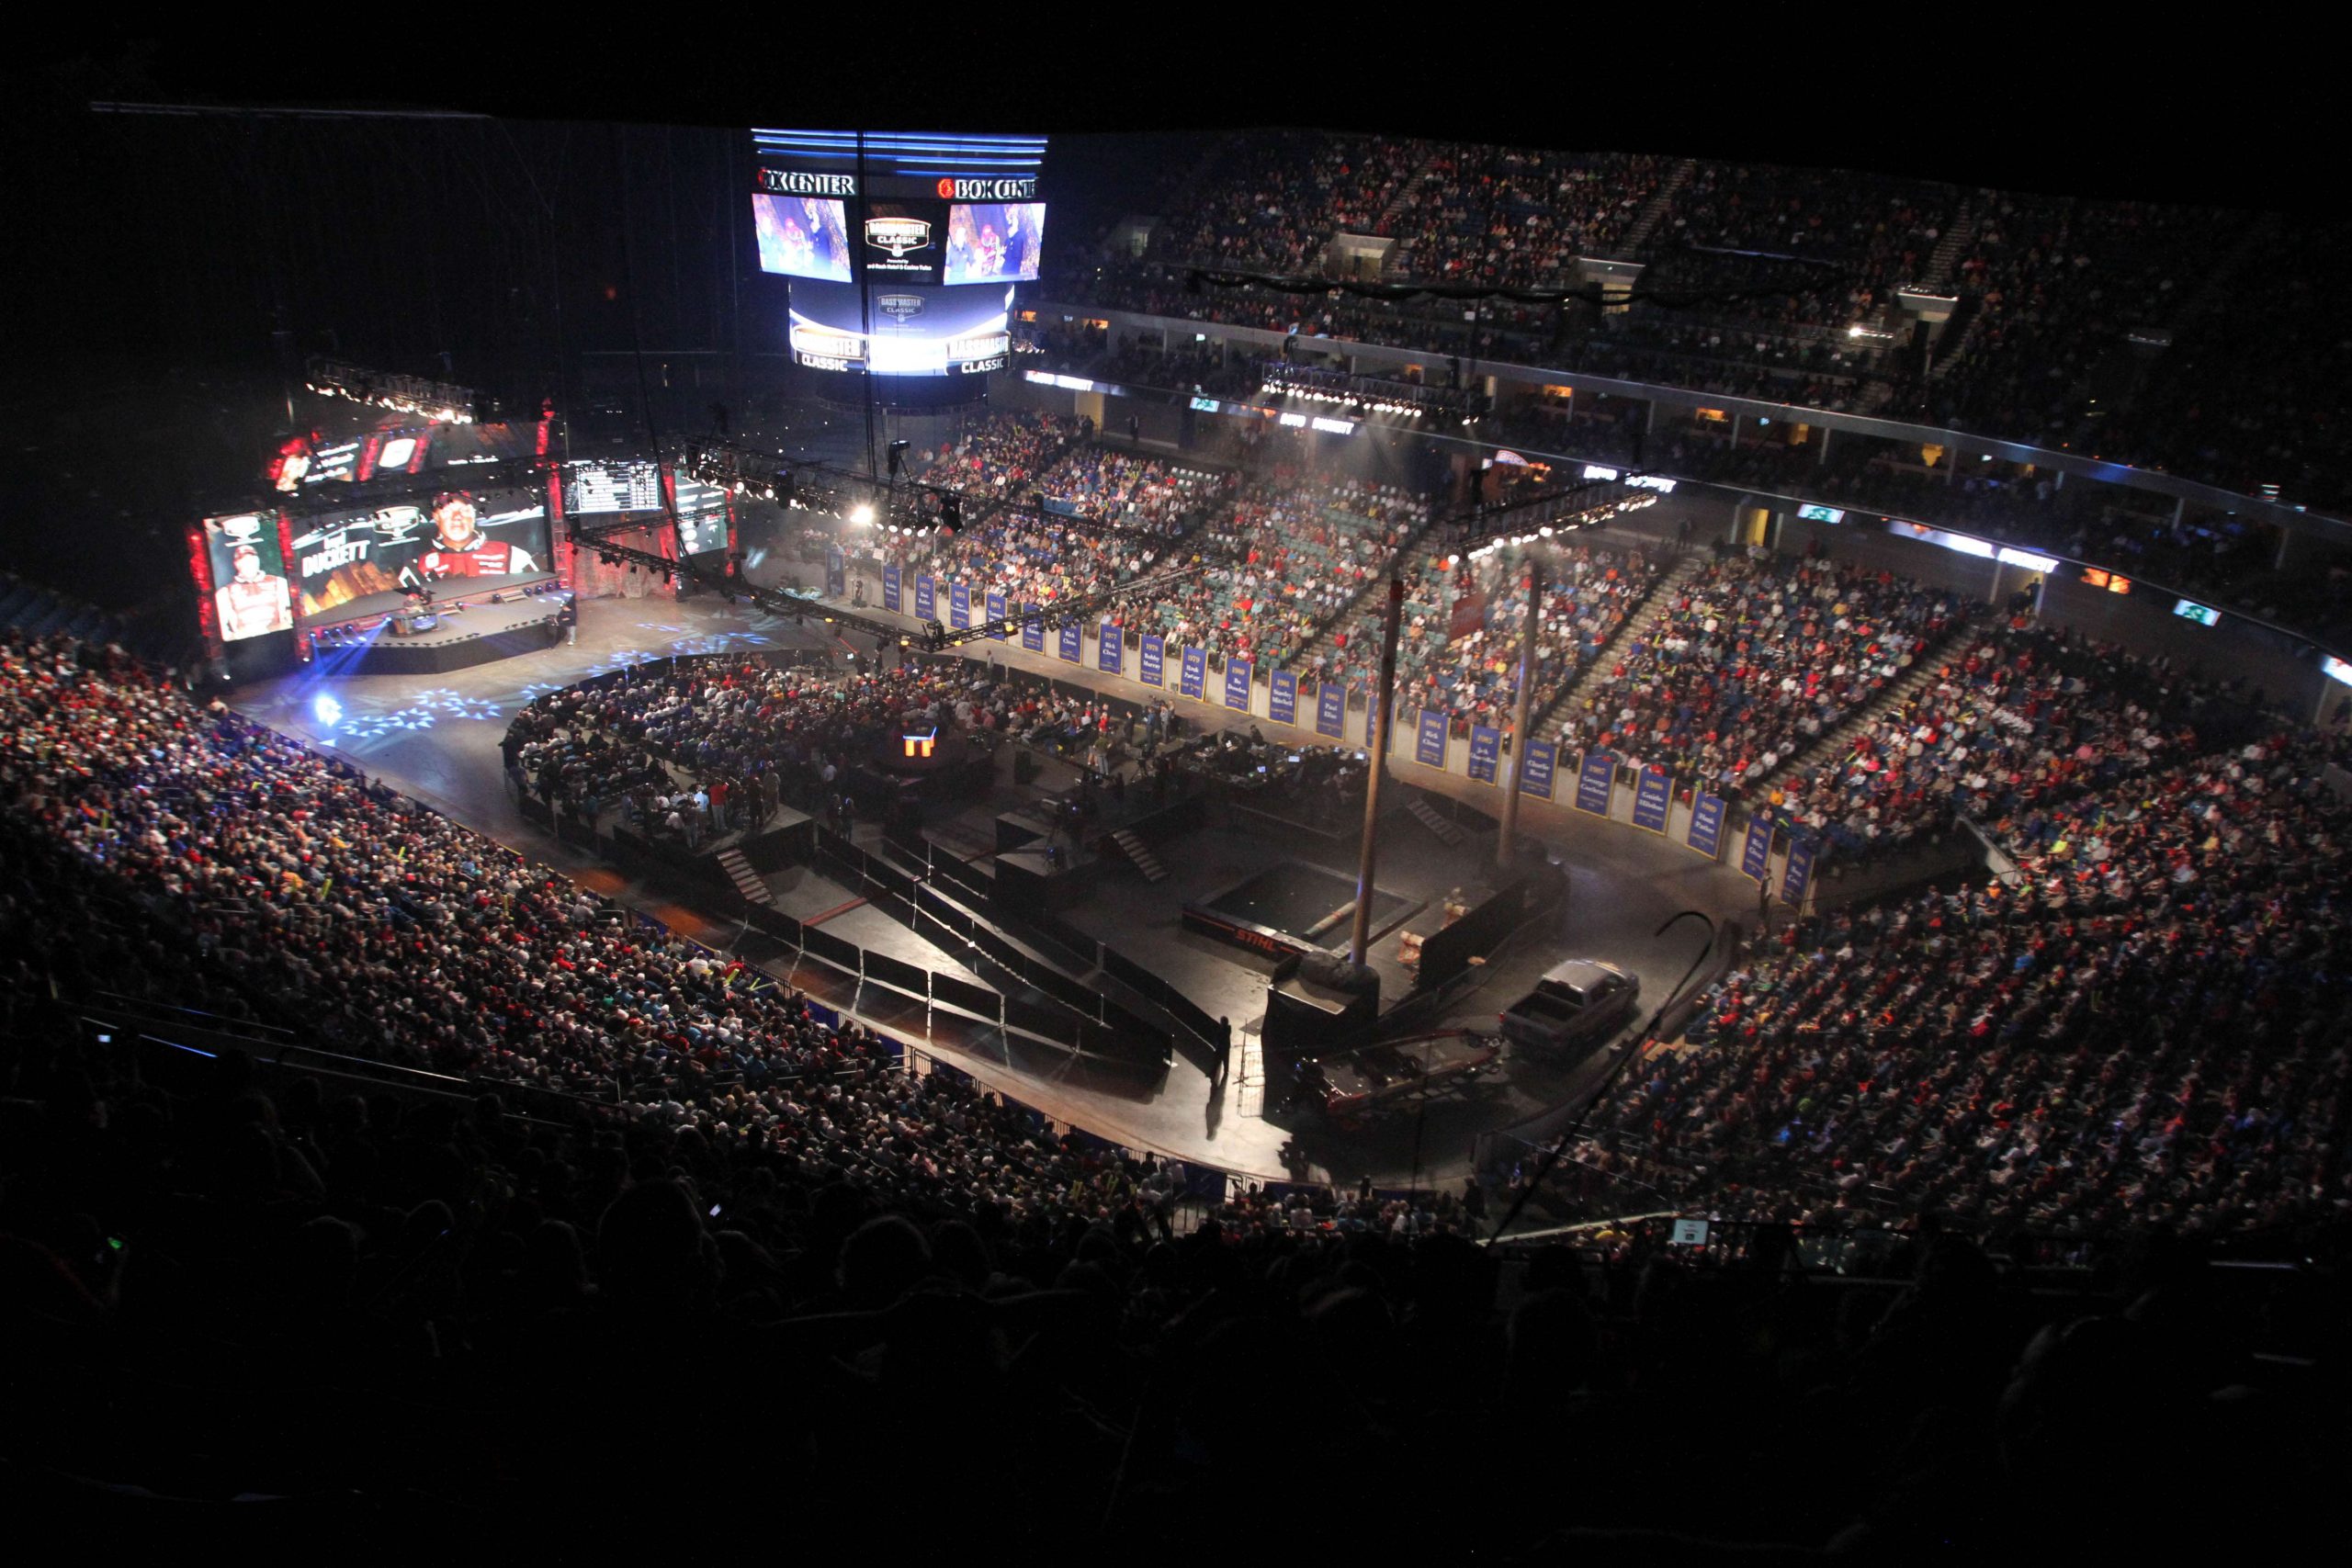 The site of the 2013 Bassmaster Classic will play host to the 2016 Classic â Tulsa, Oklahoma and the Grand Lake O' the Cherokees. The BOK Center will once again roar with thousands of crazy B.A.S.S. fans. 